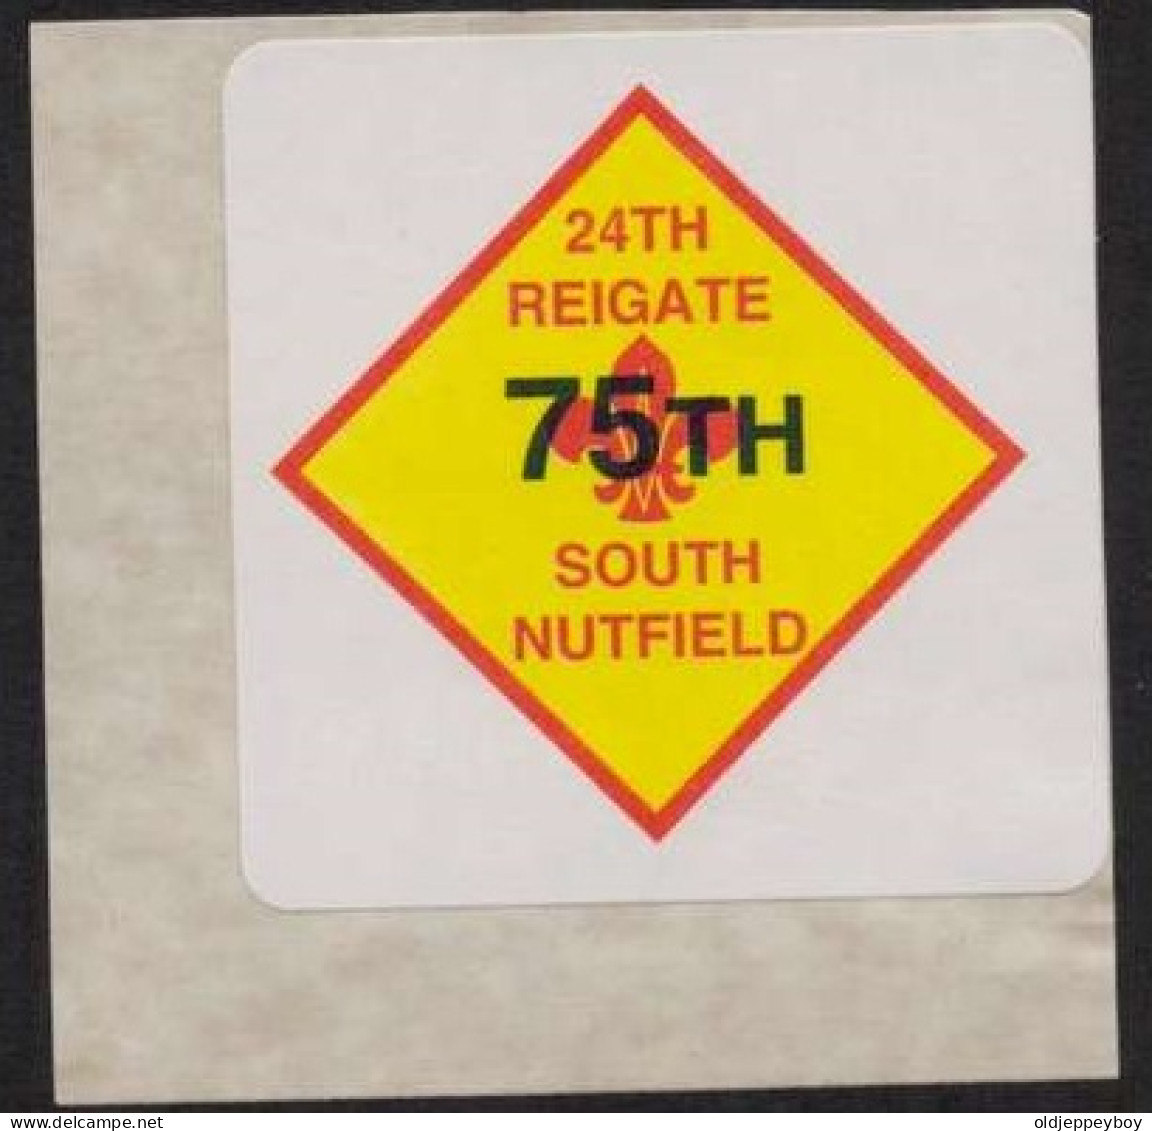 MNH**  75 Th South Nutfield 24TH REIGATE VIGNETTE SCOUTS POSTER STAMP  Pfadfinder CINDERELLA SCOUTING SCOUTISMO - Neufs